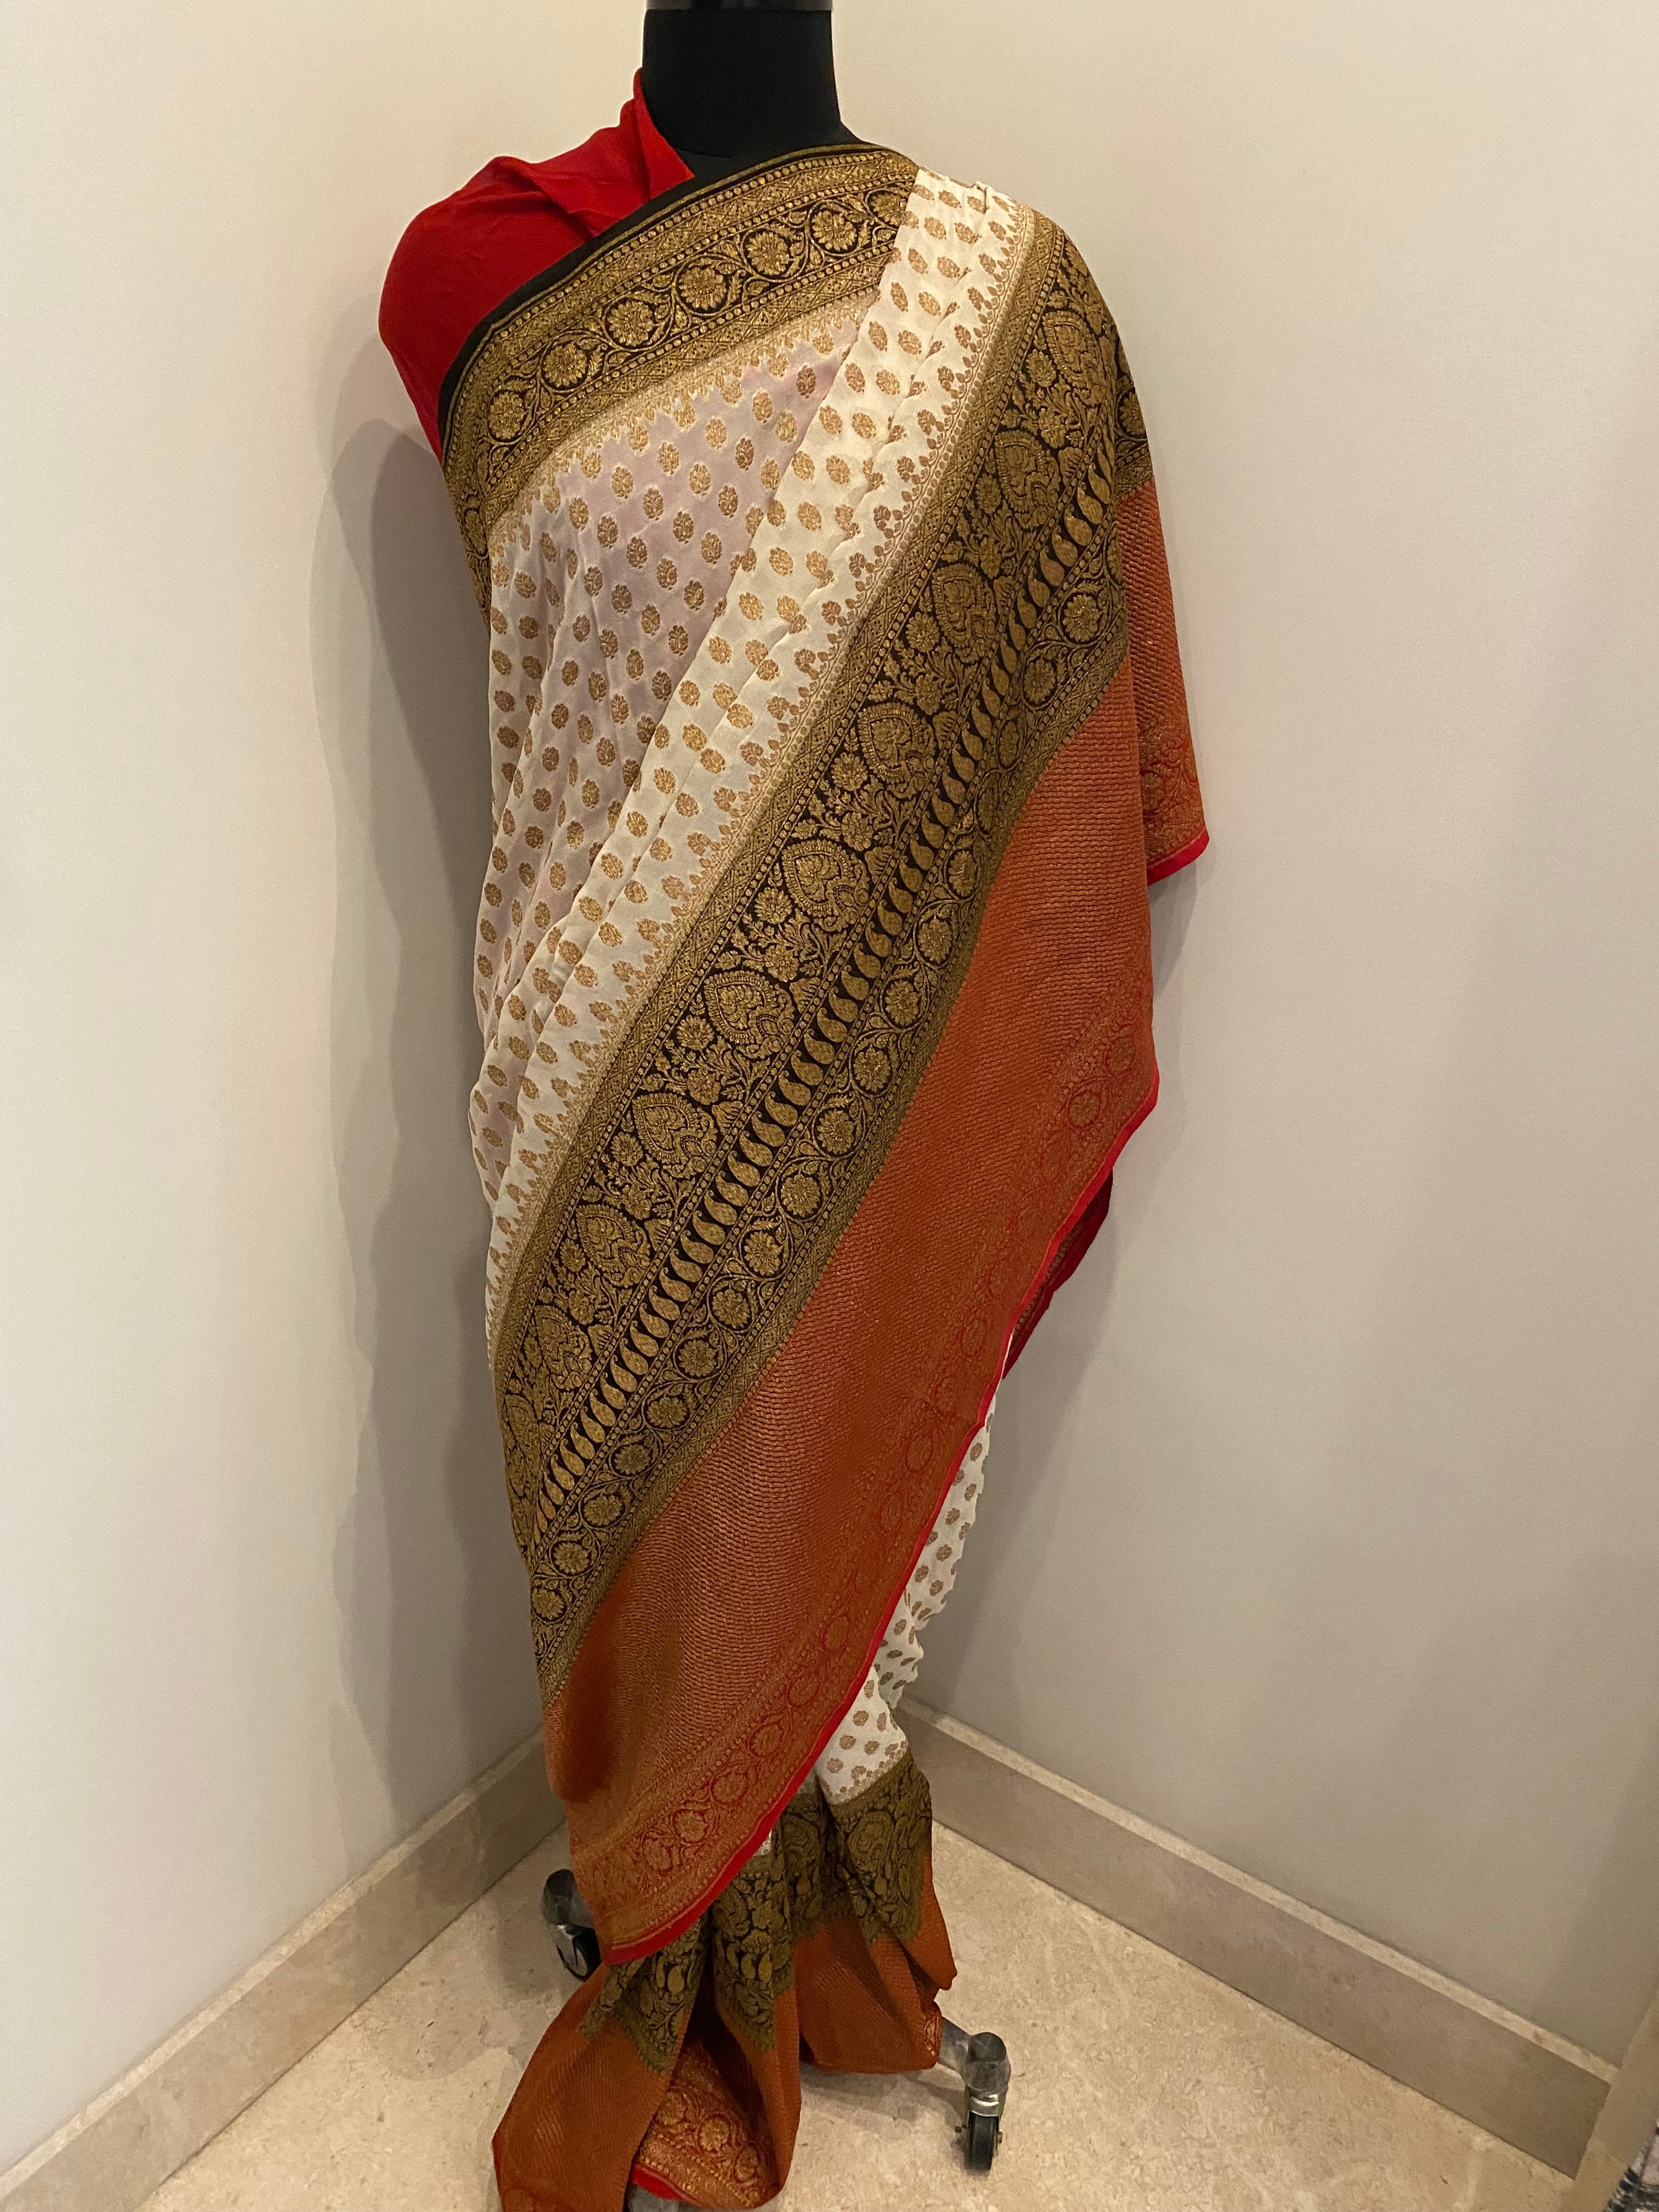 Pure Georgette Saree x Banarasi x Shades of White, Red and Black